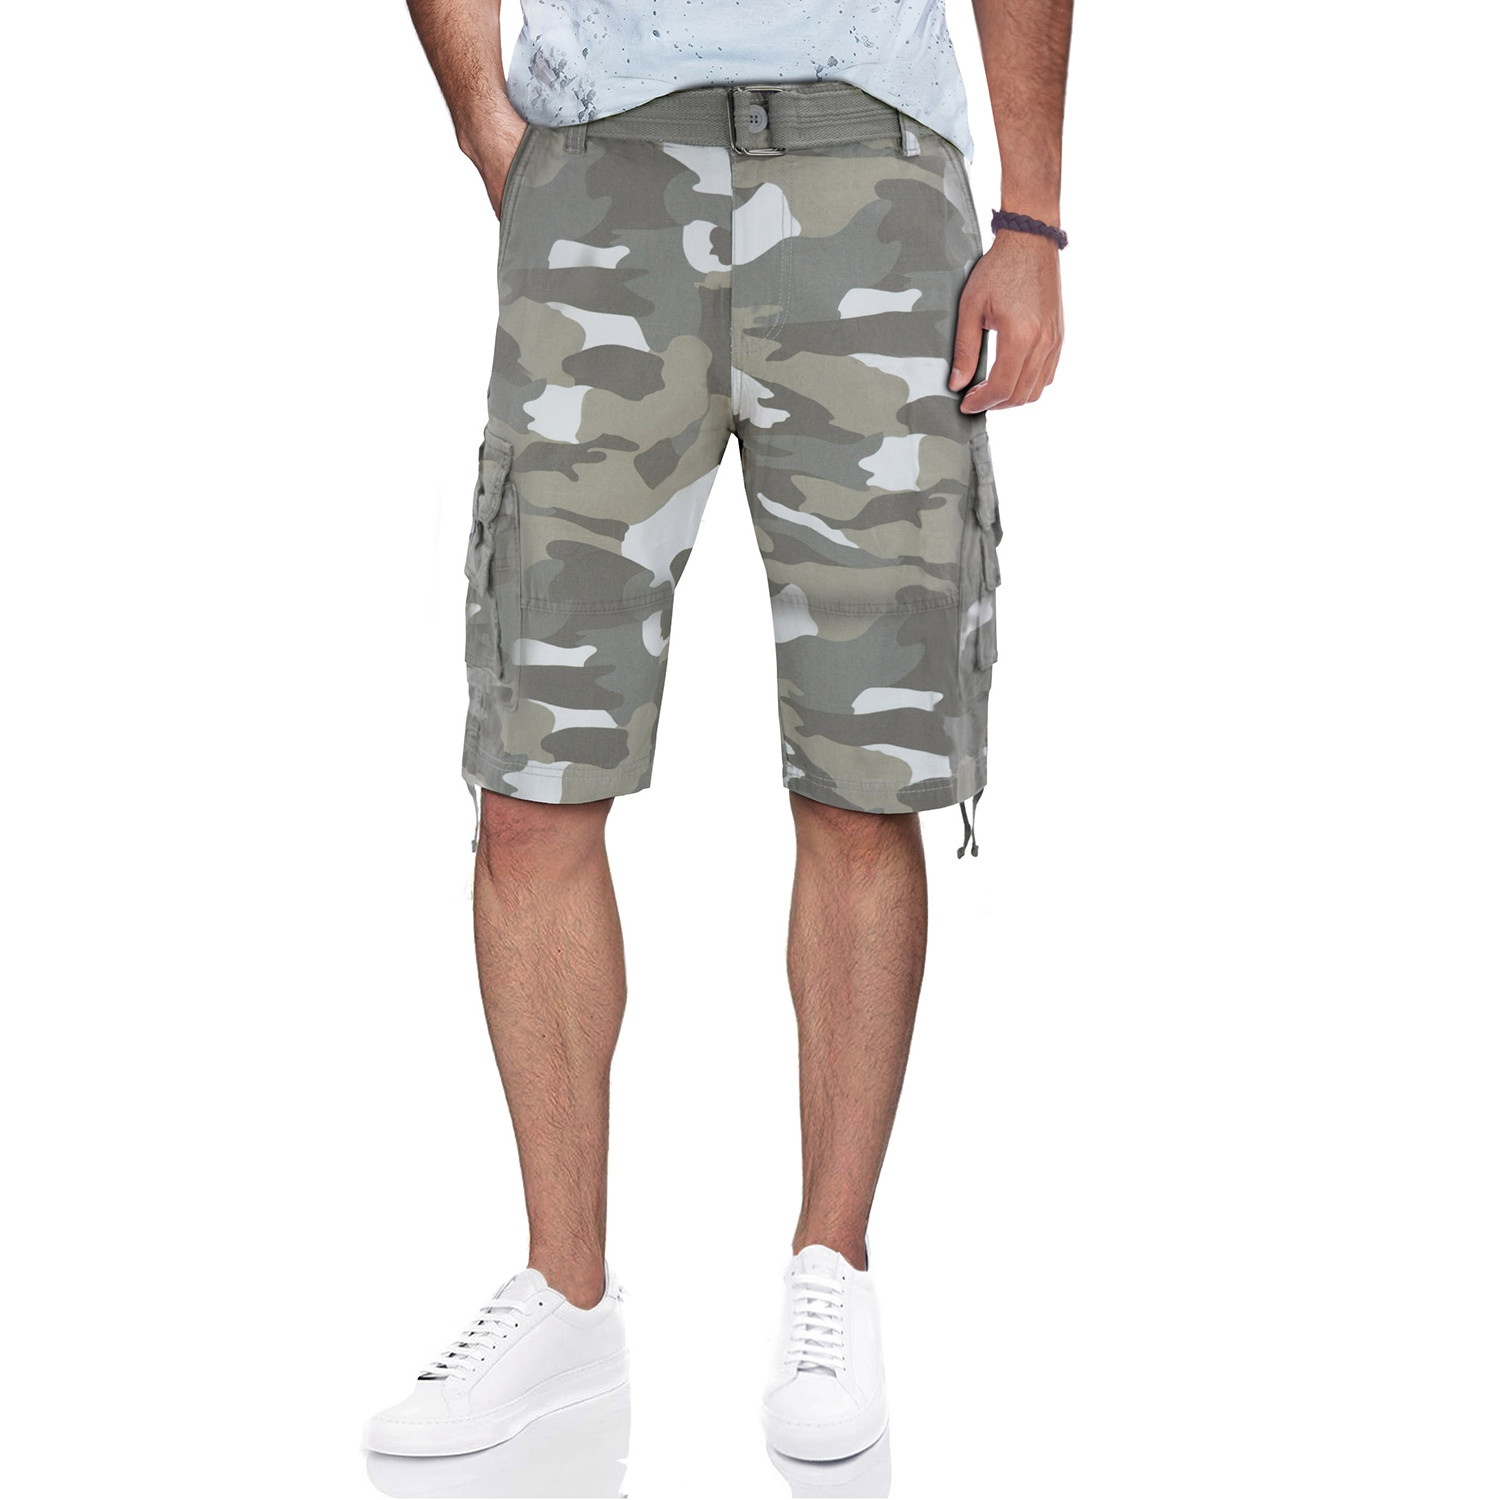 BeLighted Cargo Shorts + Twill Piping // White Camo (36) - Xray Jeans ...